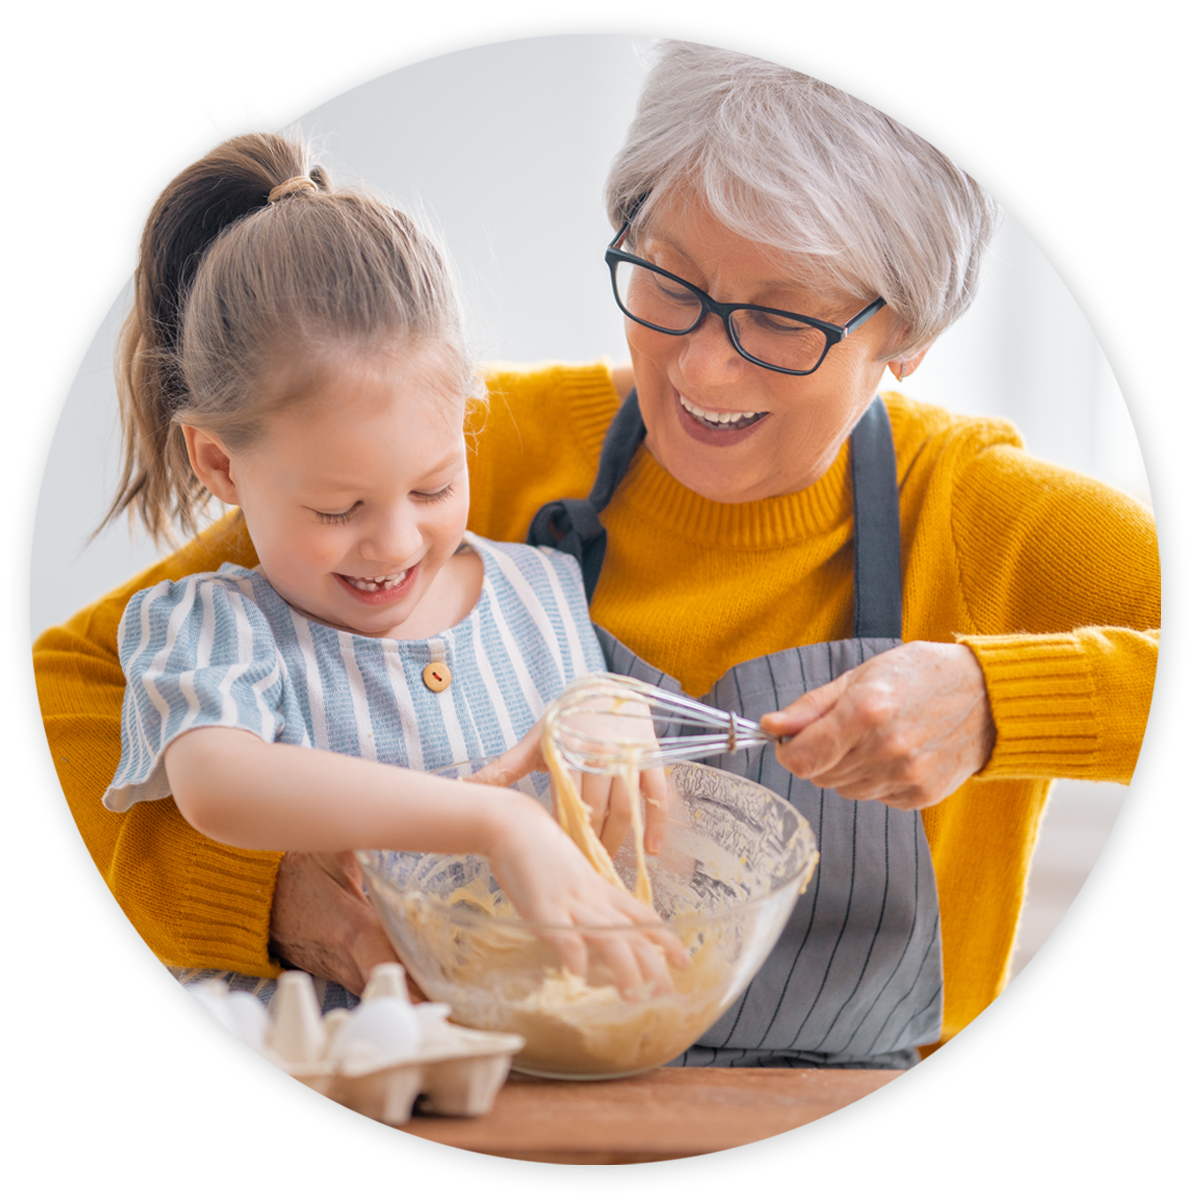 Grandmother smiling and baking with happy granddaughter